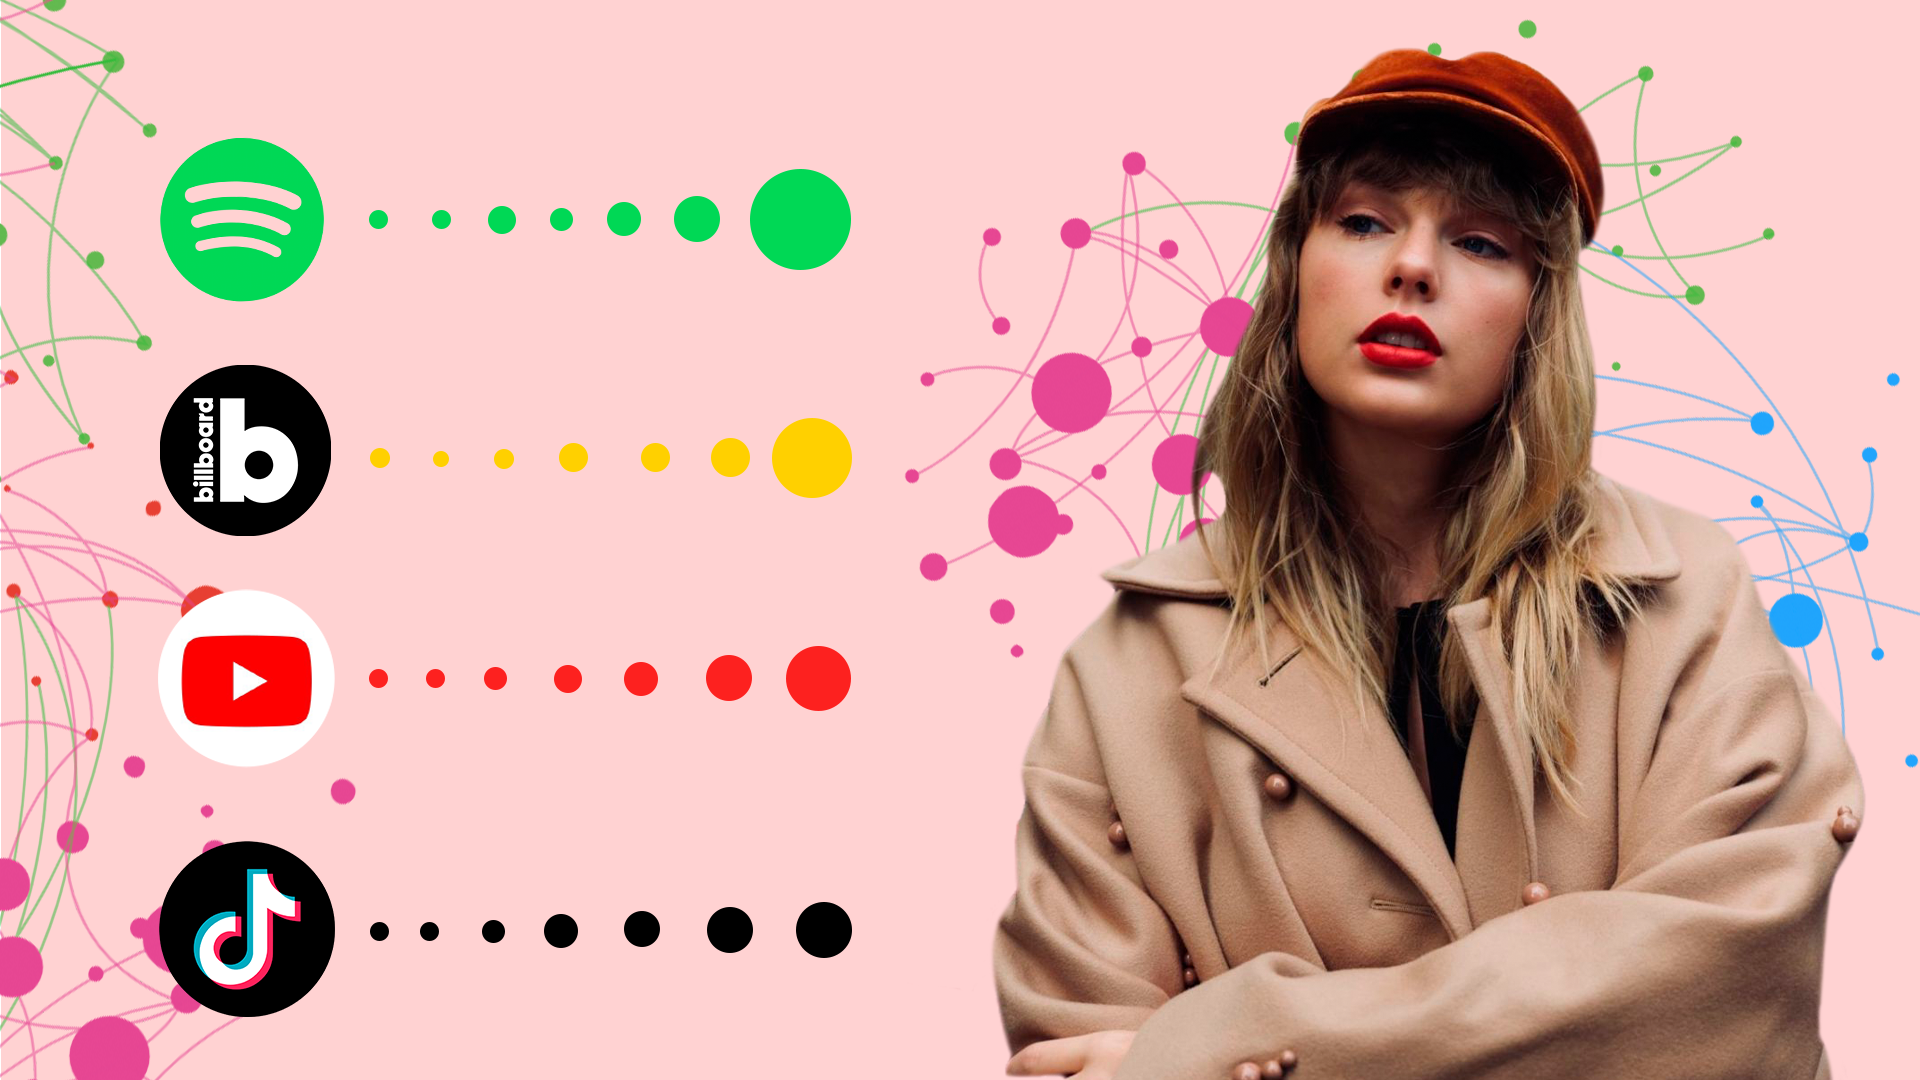 Taylor Swift's Still Here Baseball Hat—Shop the Look